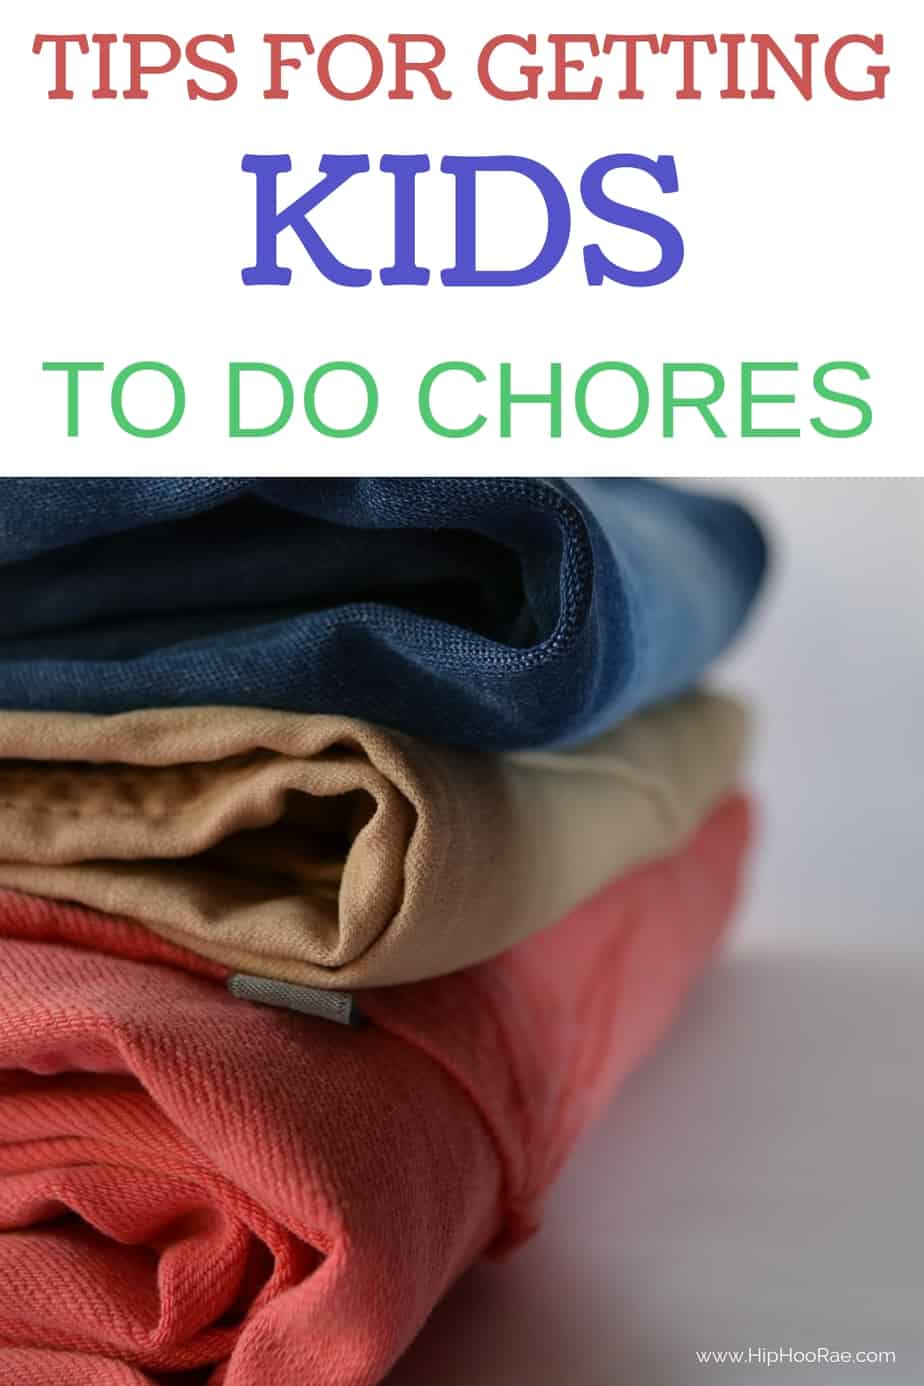 Tips For Getting Kids To Do Chores